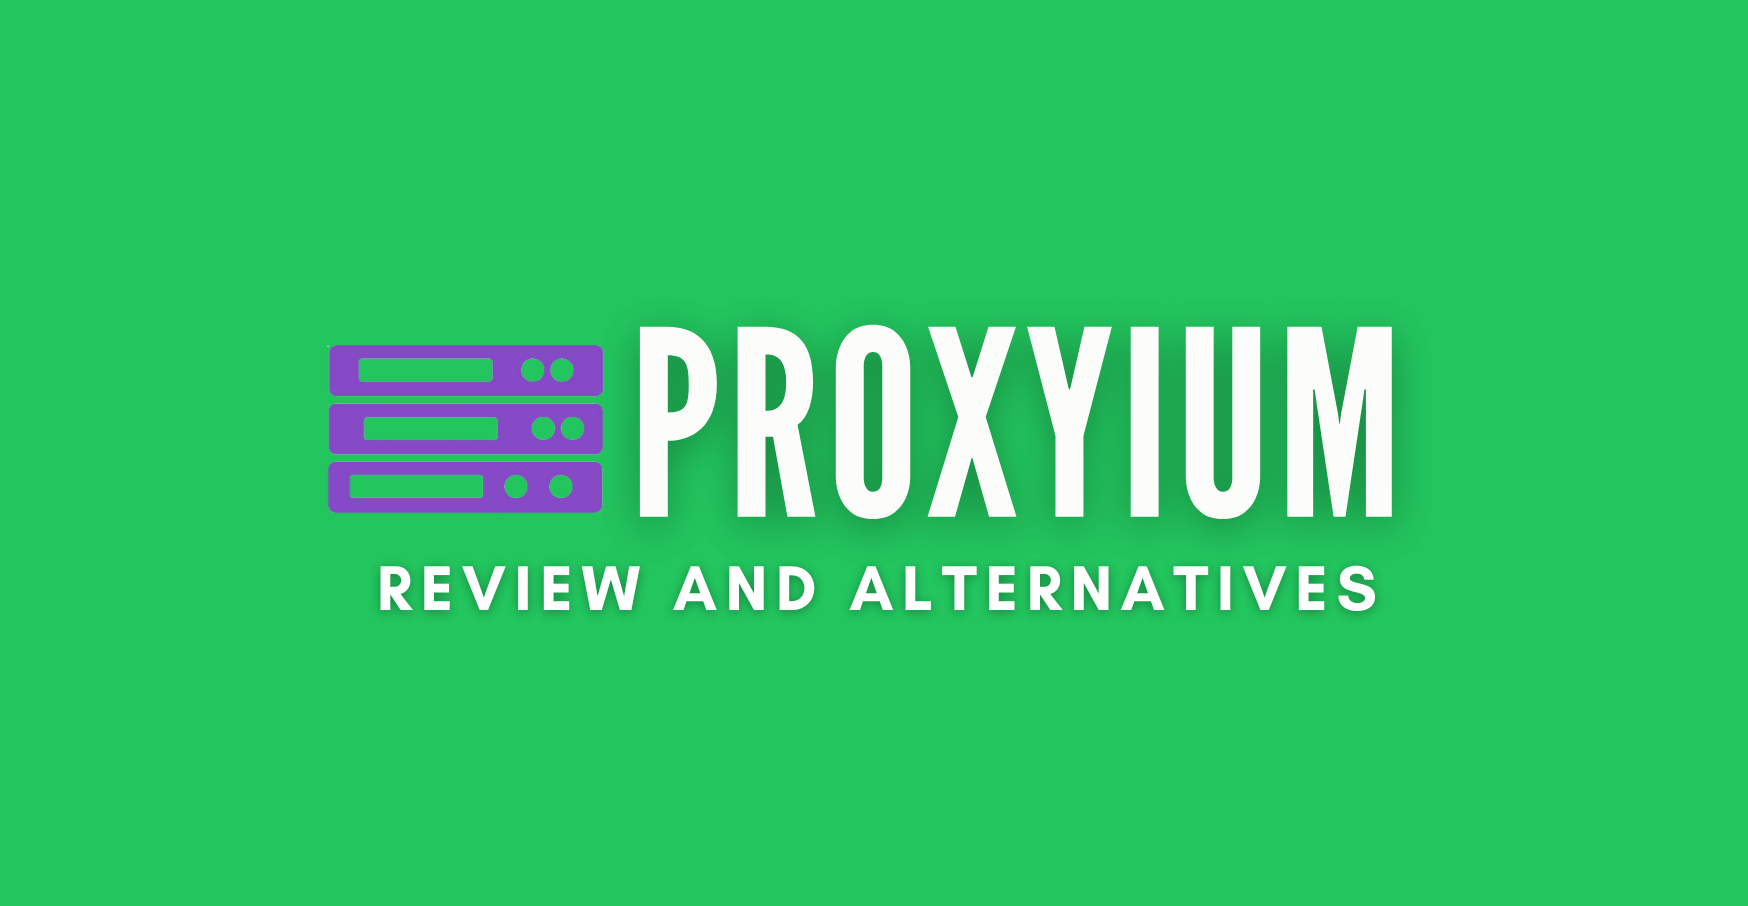 PROXYIUM review and alternatives